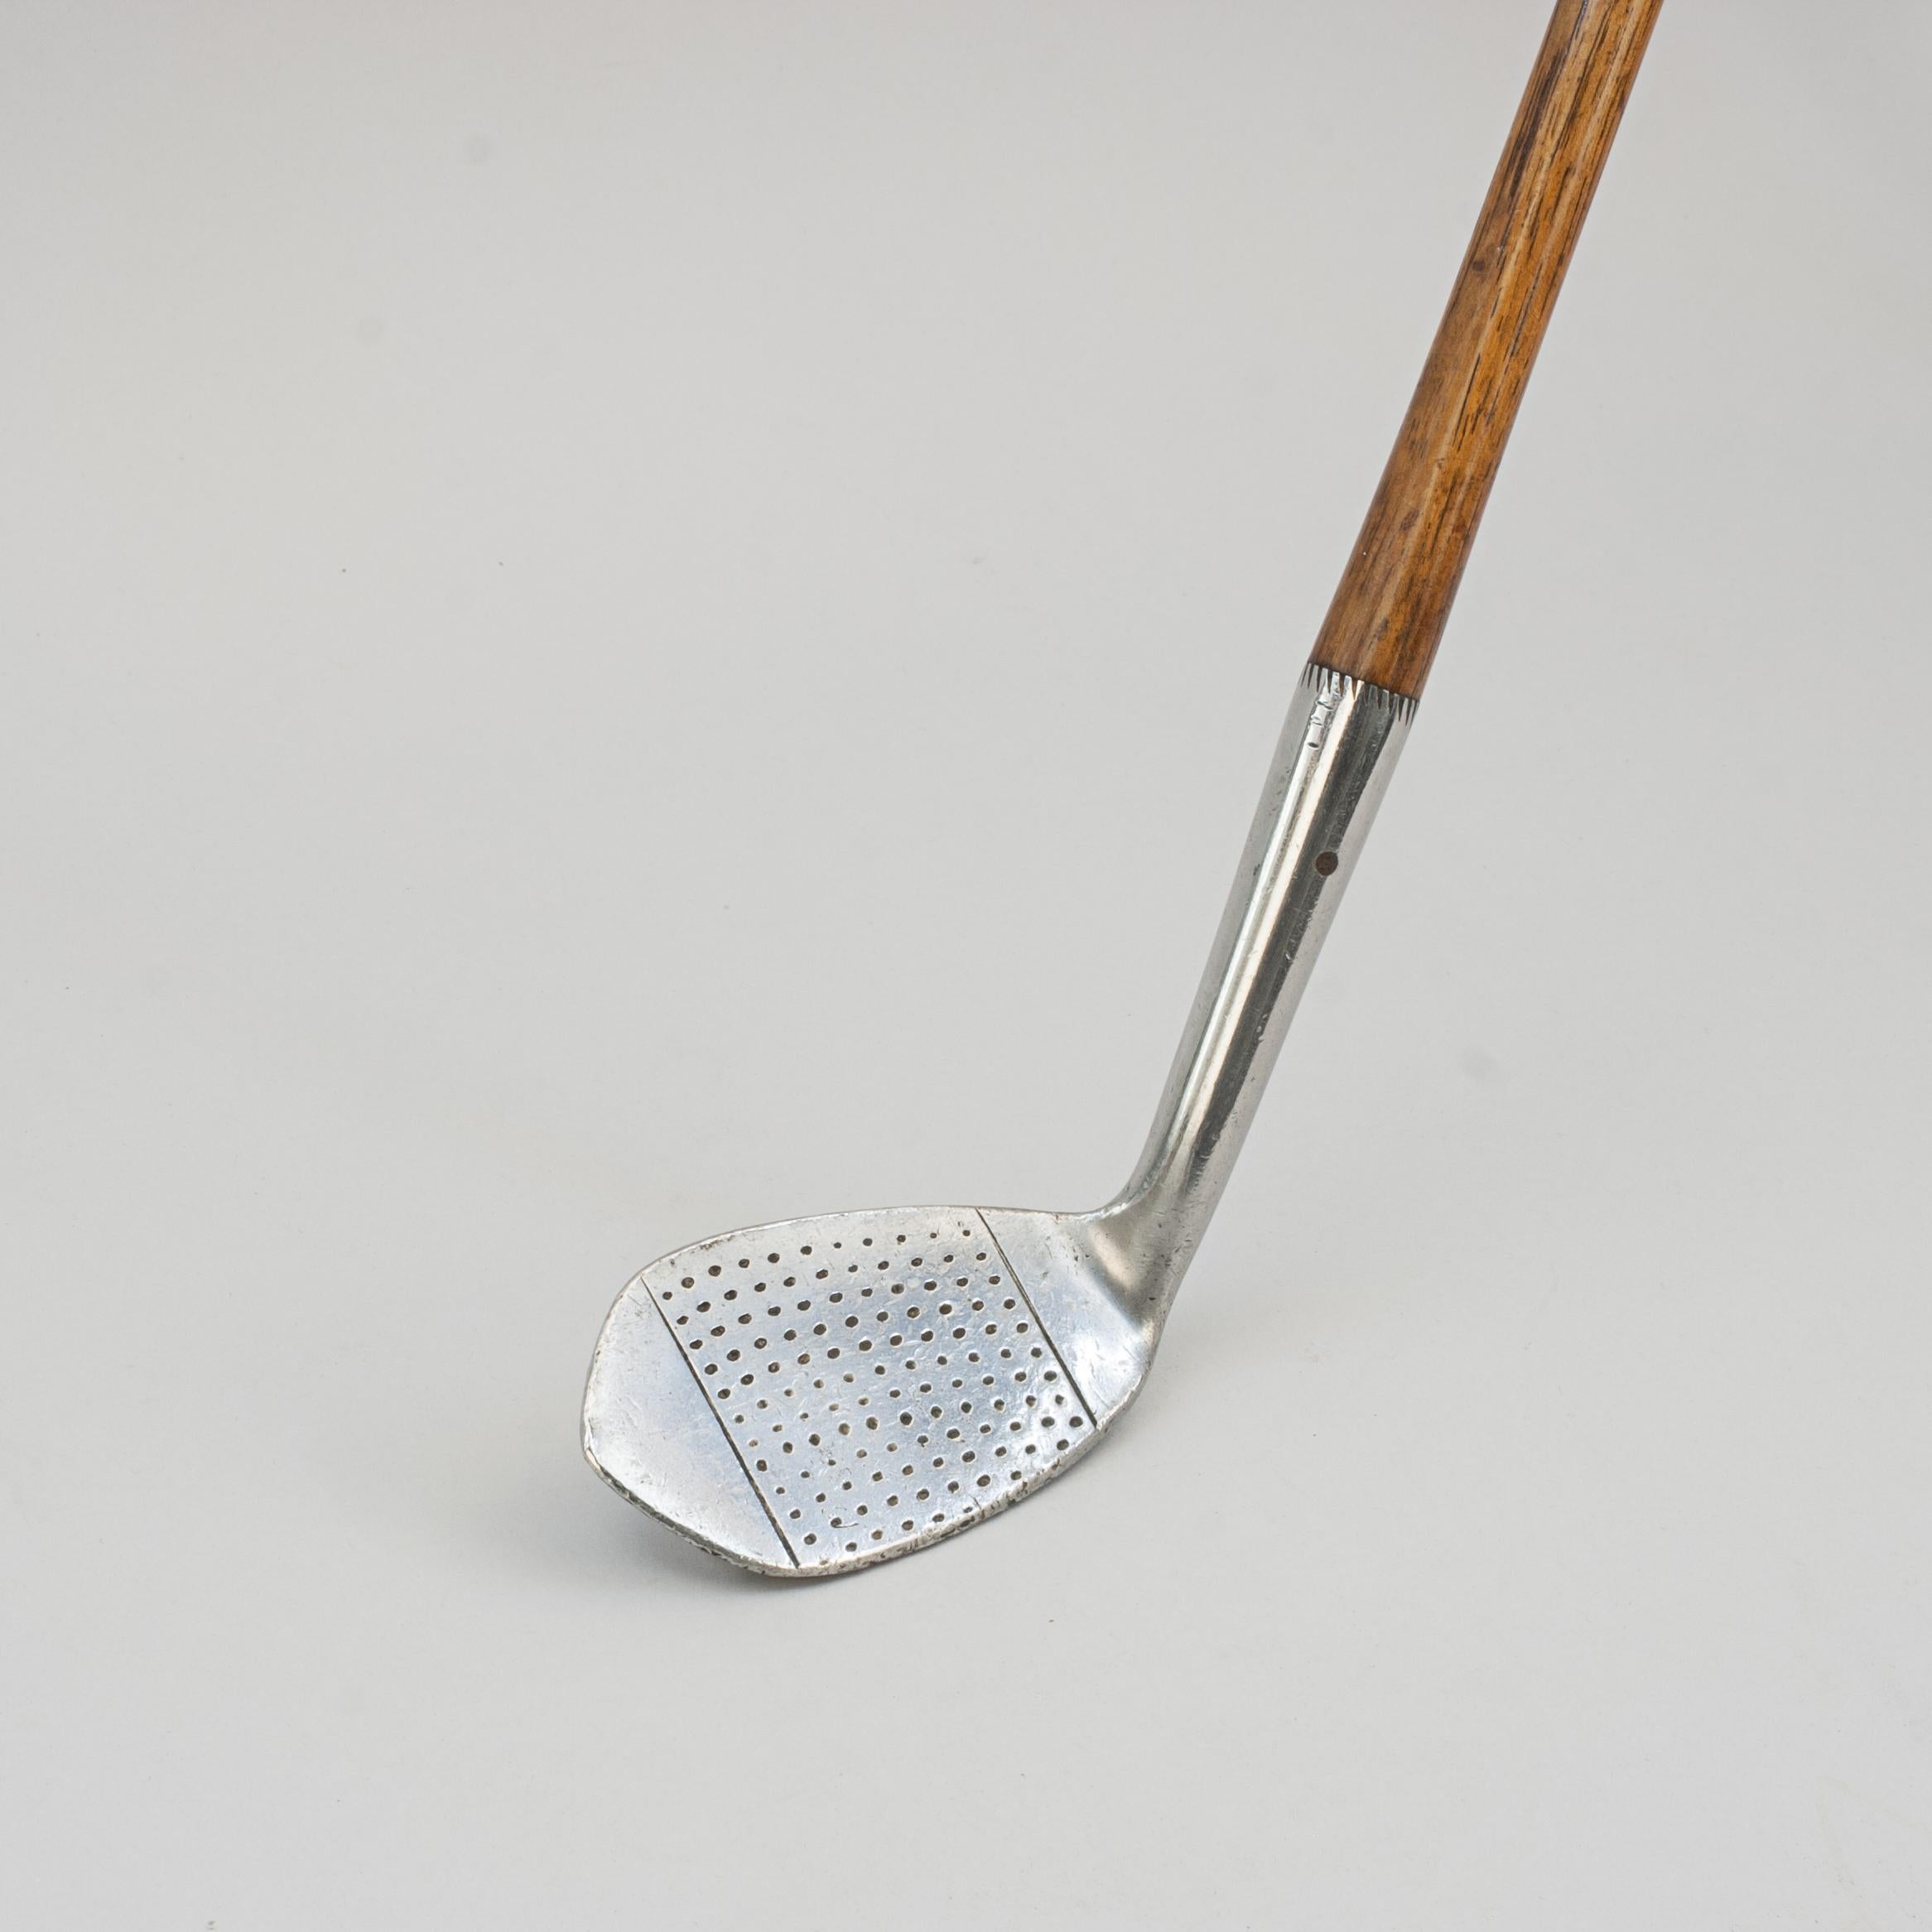 Vintage Hickory Golf Club, Pitcher, St Andrews.
A fine and nicely weighted dot punched faced pitcher by D. Anderson & Sons, St Andrews. The rear of the club head marked 'Premier Rustless, Monarch Pitcher, D. Anderson & Sons, St Andrews, Special,